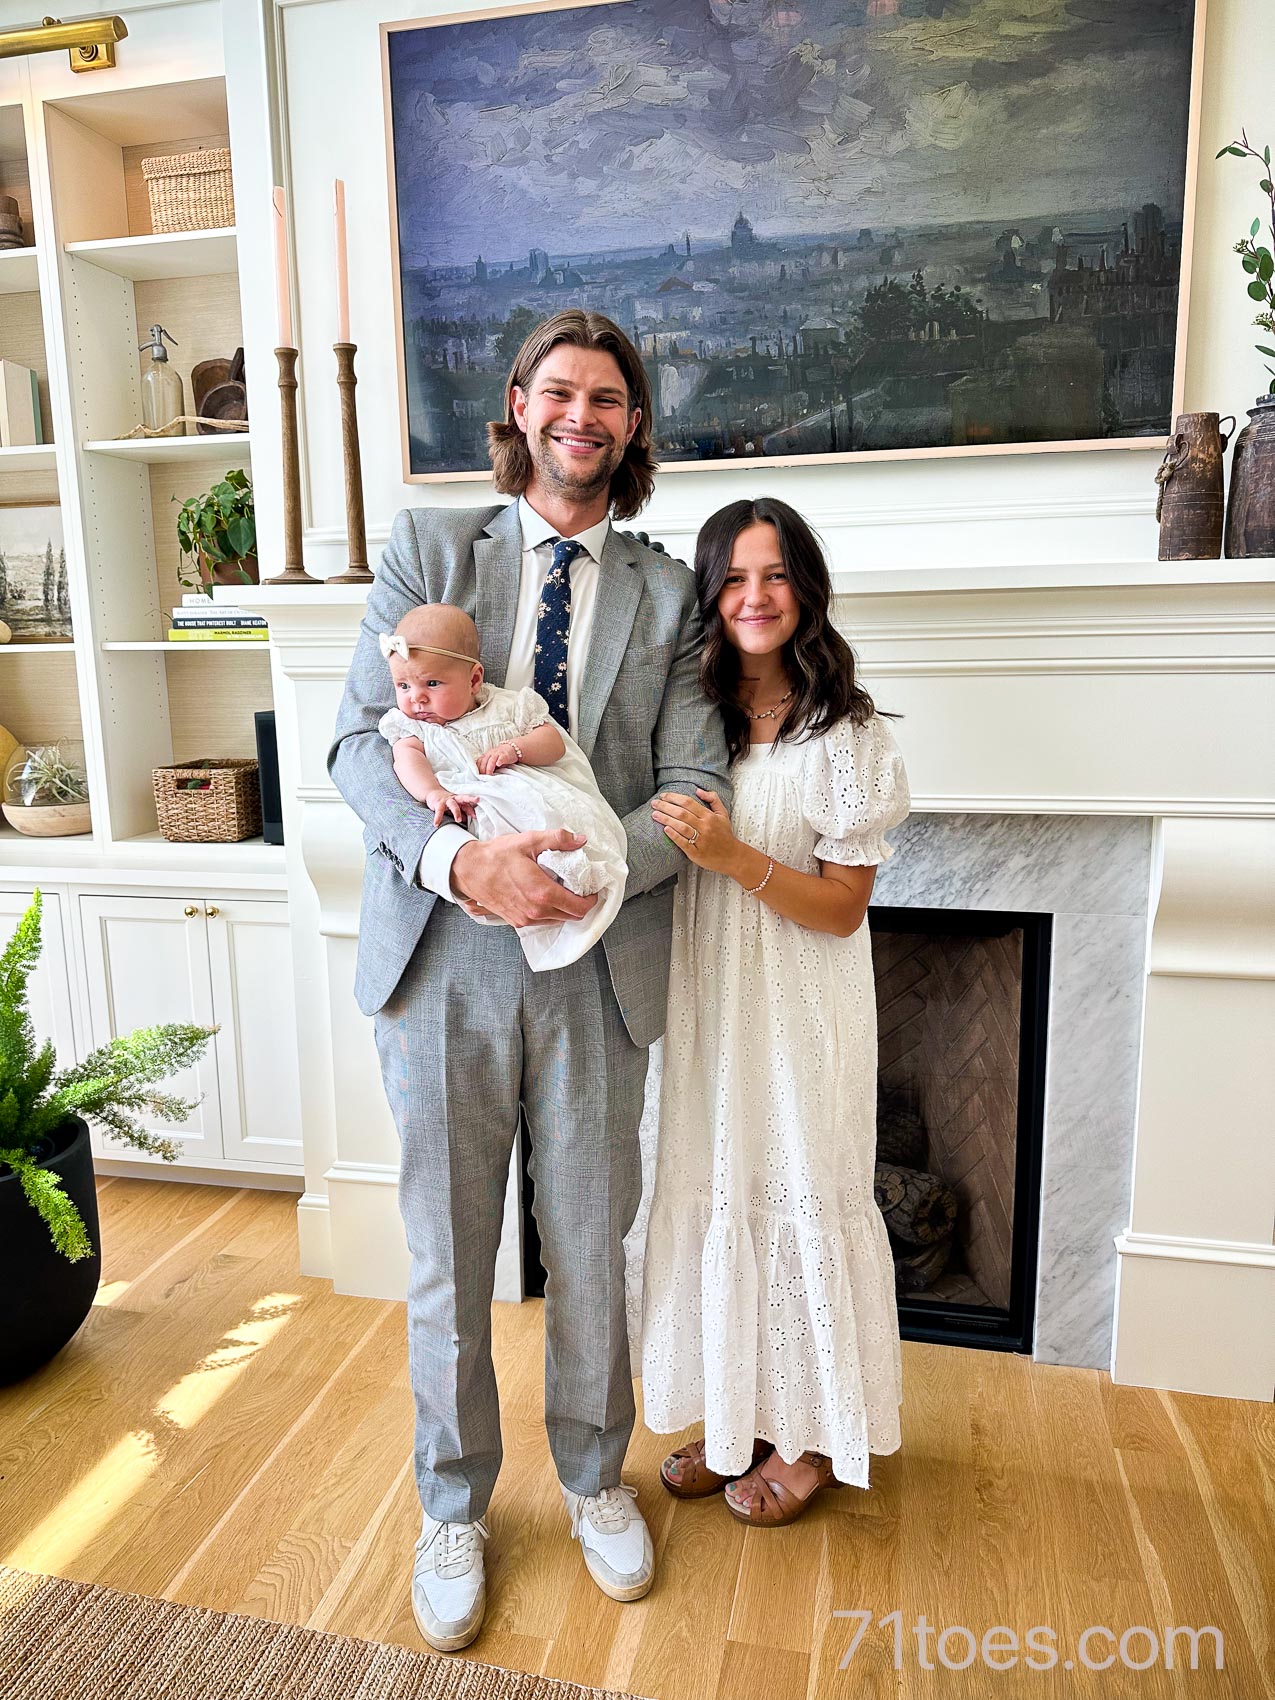 Max and Abby with baby Murphy on her blessing day